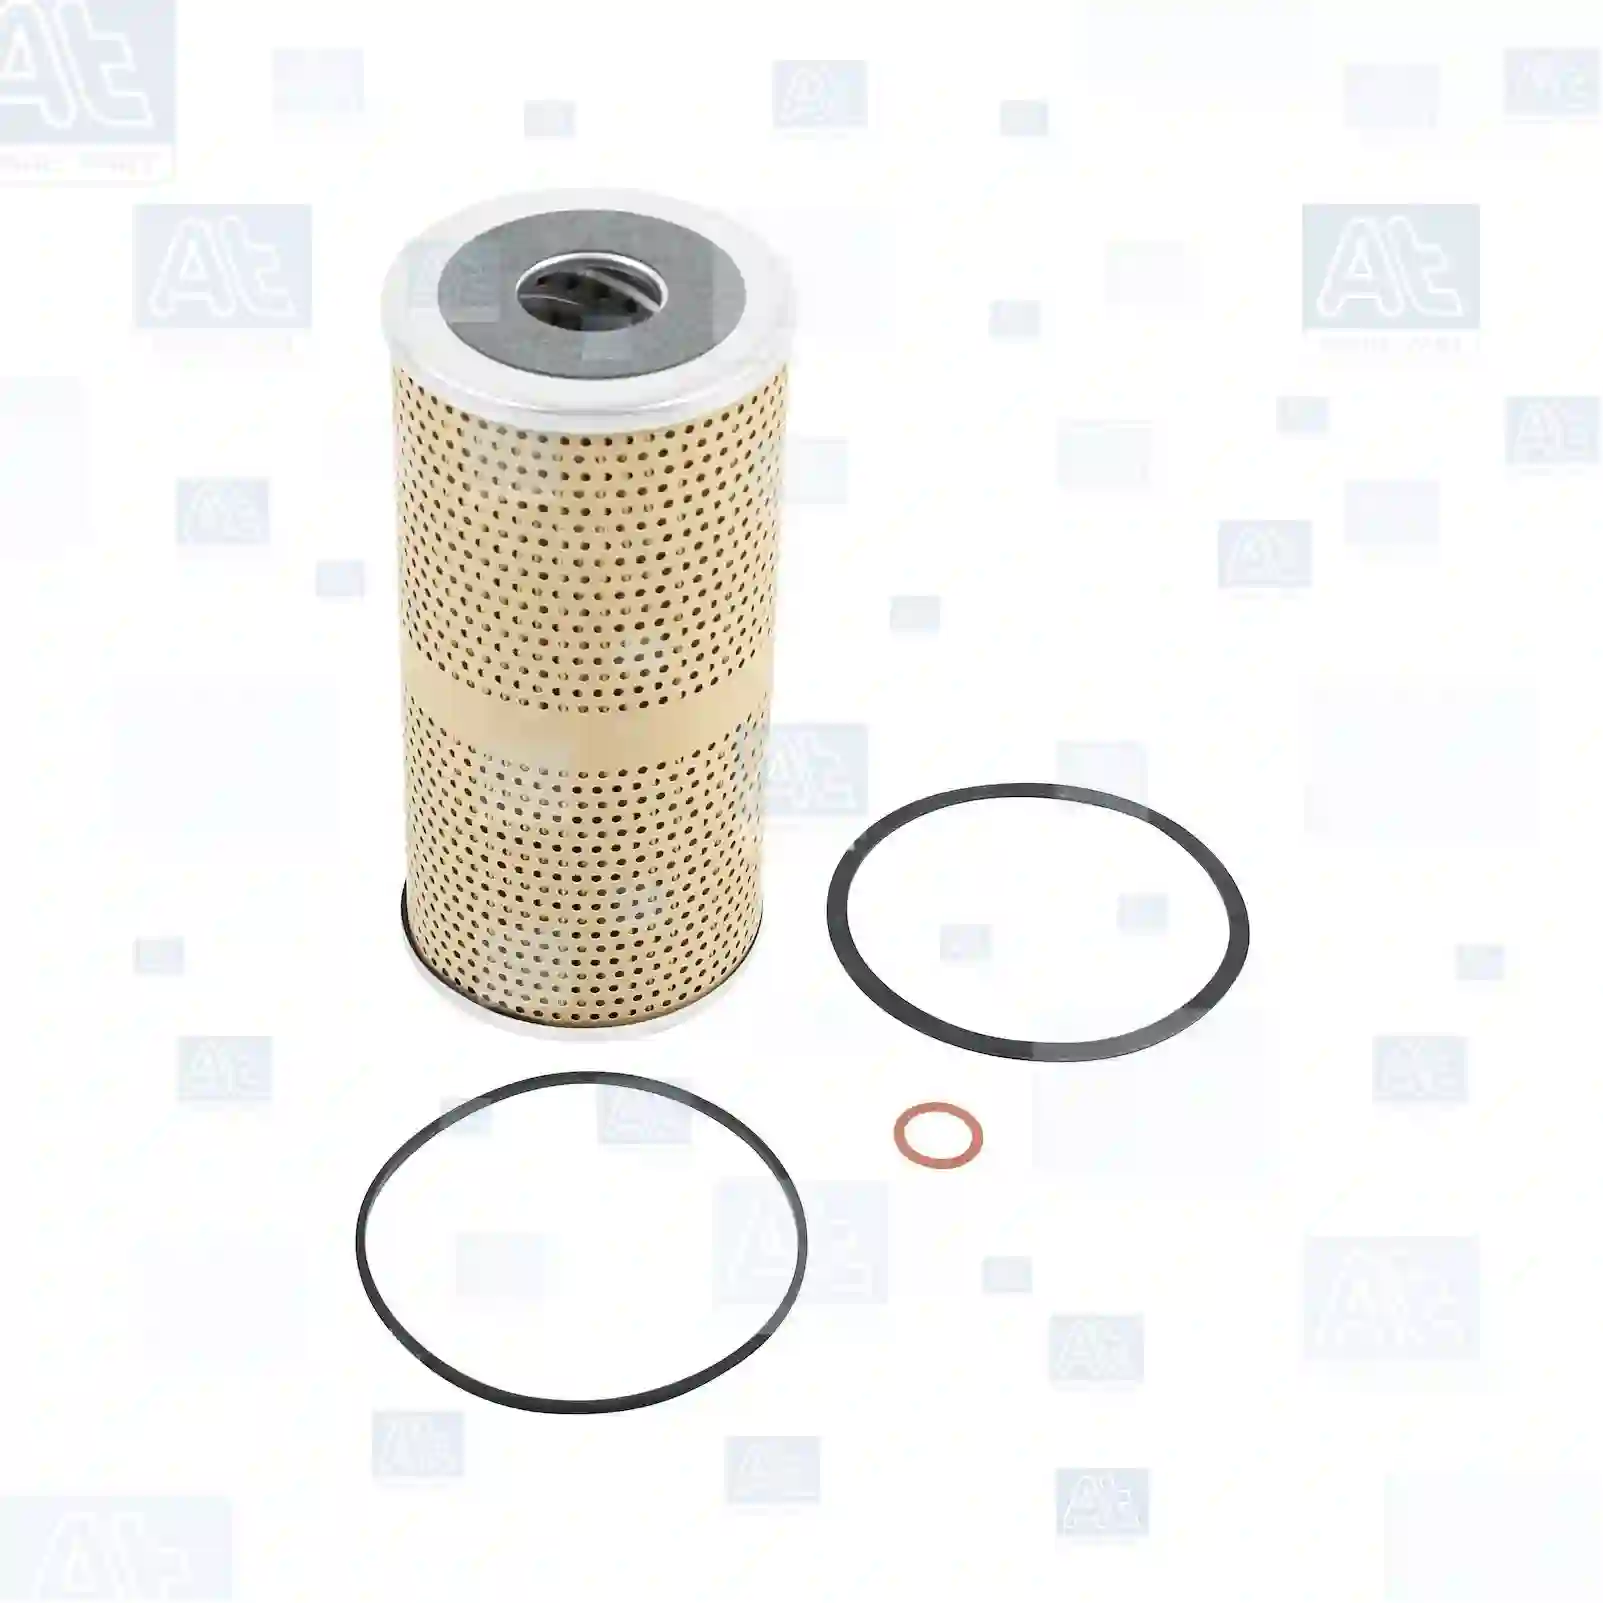 Oil filter, at no 77700064, oem no: 00597926, 00793528, 00817332, 00908285, 01856915, 01880566, 04310216, 043710219, 059792, 079352, 079362, 081733, 090828, 185691, 1856915, 188056, 197121, 221041, 3022104, 30221041, 3104894, 31048945, 431021, 4335348, 43353488, 4369988, 43699880, 4371021, 43710219, 4395889, 665859, 6658595, 70197121, 73022104, 73104894, 74335348, 74371021, 74395889, 5573014, 5573014, 131470H1, 131570H1, 302565R91, 302574R91, 303122R91, 304753C91, 3068931R91, 3071235R91, 319826R91, 319926R91, 333719R91, 340175R91, 35034, 35054, 612724C91, 613797C91, 613798C91, 877380C91, L031230, L31230, L31231, L33711, R14458, 3I-1149, 3I-1224, 9Y-4456, 9Y-4515, 2647666, 128903, 131570, 142879, 142897, 215502, 3301060, 3301061, 988618, 98861800, 5573014, 4194770, 4788715, 7390983, 7391047, 00022104, 00079325, 00079352, 00081733, 00090828, 00185691, 00188056, 00197121, 00431021, 00665859, 00761970, 01366330, 01831101, 01836103, 01856915, 01880566, 01901934, 03022104, 04335348, 04369988, 04371021, 04371137, 04395889, 04528873, 04538573, 04587711, 04590074, 04596890, 04596891, 04636295, 04636401, 04777257, 04777258, 04887711, 07722336, 08813556, 45938901, 552442365, 556019309, 701856915, 701880566, 70022104, 70059792, 70079325, 70079352, 70081733, 70090828, 70197121, 70431021, 73022104, 73104894, 74335348, 74347021, 74371021, 74371137, 74395889, 74538573, 74587711, 74590074, 74596890, 74596891, 74636401, 74887711, 78813556, 79010563, 79032093, Y02274510, YO2274510, 5000872, 5011472, DNP550132, 5572600, 5573012, 5573013, 5573014, 5573102, 5574971, 5575134, 5575176, 5575208, 5575995, 5576067, 5576200, 5577106, 5577124, 5578014, 6427275, 6436145, 6437275, 6438590, 9020329, 9029329, 9307817, 5572600, 5573012, 5573013, 5573014, 5573102, 5574971, 5575134, 5575176, 5575208, 5575995, 5576067, 5576200, 5577106, 5577124, 5578014, 6427275, 6436145, 6437275, 6438590, 6439400, 7984308, 7437000038, 9437100063, 9437100139, 01901608, 01901934, 04596890, 04636401, 08813556, 1901934, 73104894, 74590074, 78813556, 32/300518, AR29554R, AR30643R, AR36043R, AT34760, E035481, E35481, 4371021, 5573014, 5574486, KW509, KW509LUB, 5000931, P21366, 20010, 236GB240, 236GB240LUB, 1087415, 1087415M91, 1755206, 835514, 969062, PB509N, PB509NLUB, 1050545, 150545, W1050545, 0003139010, 0003180836, 0003620612, HD4124, LU698, 3F12181, 5573014, 5576711, 5677124, 267518, 3130910, 40141558, 4095654, 62129697, 66175068, 6617509, 6631812, 79211272, 892972 At Spare Part | Engine, Accelerator Pedal, Camshaft, Connecting Rod, Crankcase, Crankshaft, Cylinder Head, Engine Suspension Mountings, Exhaust Manifold, Exhaust Gas Recirculation, Filter Kits, Flywheel Housing, General Overhaul Kits, Engine, Intake Manifold, Oil Cleaner, Oil Cooler, Oil Filter, Oil Pump, Oil Sump, Piston & Liner, Sensor & Switch, Timing Case, Turbocharger, Cooling System, Belt Tensioner, Coolant Filter, Coolant Pipe, Corrosion Prevention Agent, Drive, Expansion Tank, Fan, Intercooler, Monitors & Gauges, Radiator, Thermostat, V-Belt / Timing belt, Water Pump, Fuel System, Electronical Injector Unit, Feed Pump, Fuel Filter, cpl., Fuel Gauge Sender,  Fuel Line, Fuel Pump, Fuel Tank, Injection Line Kit, Injection Pump, Exhaust System, Clutch & Pedal, Gearbox, Propeller Shaft, Axles, Brake System, Hubs & Wheels, Suspension, Leaf Spring, Universal Parts / Accessories, Steering, Electrical System, Cabin Oil filter, at no 77700064, oem no: 00597926, 00793528, 00817332, 00908285, 01856915, 01880566, 04310216, 043710219, 059792, 079352, 079362, 081733, 090828, 185691, 1856915, 188056, 197121, 221041, 3022104, 30221041, 3104894, 31048945, 431021, 4335348, 43353488, 4369988, 43699880, 4371021, 43710219, 4395889, 665859, 6658595, 70197121, 73022104, 73104894, 74335348, 74371021, 74395889, 5573014, 5573014, 131470H1, 131570H1, 302565R91, 302574R91, 303122R91, 304753C91, 3068931R91, 3071235R91, 319826R91, 319926R91, 333719R91, 340175R91, 35034, 35054, 612724C91, 613797C91, 613798C91, 877380C91, L031230, L31230, L31231, L33711, R14458, 3I-1149, 3I-1224, 9Y-4456, 9Y-4515, 2647666, 128903, 131570, 142879, 142897, 215502, 3301060, 3301061, 988618, 98861800, 5573014, 4194770, 4788715, 7390983, 7391047, 00022104, 00079325, 00079352, 00081733, 00090828, 00185691, 00188056, 00197121, 00431021, 00665859, 00761970, 01366330, 01831101, 01836103, 01856915, 01880566, 01901934, 03022104, 04335348, 04369988, 04371021, 04371137, 04395889, 04528873, 04538573, 04587711, 04590074, 04596890, 04596891, 04636295, 04636401, 04777257, 04777258, 04887711, 07722336, 08813556, 45938901, 552442365, 556019309, 701856915, 701880566, 70022104, 70059792, 70079325, 70079352, 70081733, 70090828, 70197121, 70431021, 73022104, 73104894, 74335348, 74347021, 74371021, 74371137, 74395889, 74538573, 74587711, 74590074, 74596890, 74596891, 74636401, 74887711, 78813556, 79010563, 79032093, Y02274510, YO2274510, 5000872, 5011472, DNP550132, 5572600, 5573012, 5573013, 5573014, 5573102, 5574971, 5575134, 5575176, 5575208, 5575995, 5576067, 5576200, 5577106, 5577124, 5578014, 6427275, 6436145, 6437275, 6438590, 9020329, 9029329, 9307817, 5572600, 5573012, 5573013, 5573014, 5573102, 5574971, 5575134, 5575176, 5575208, 5575995, 5576067, 5576200, 5577106, 5577124, 5578014, 6427275, 6436145, 6437275, 6438590, 6439400, 7984308, 7437000038, 9437100063, 9437100139, 01901608, 01901934, 04596890, 04636401, 08813556, 1901934, 73104894, 74590074, 78813556, 32/300518, AR29554R, AR30643R, AR36043R, AT34760, E035481, E35481, 4371021, 5573014, 5574486, KW509, KW509LUB, 5000931, P21366, 20010, 236GB240, 236GB240LUB, 1087415, 1087415M91, 1755206, 835514, 969062, PB509N, PB509NLUB, 1050545, 150545, W1050545, 0003139010, 0003180836, 0003620612, HD4124, LU698, 3F12181, 5573014, 5576711, 5677124, 267518, 3130910, 40141558, 4095654, 62129697, 66175068, 6617509, 6631812, 79211272, 892972 At Spare Part | Engine, Accelerator Pedal, Camshaft, Connecting Rod, Crankcase, Crankshaft, Cylinder Head, Engine Suspension Mountings, Exhaust Manifold, Exhaust Gas Recirculation, Filter Kits, Flywheel Housing, General Overhaul Kits, Engine, Intake Manifold, Oil Cleaner, Oil Cooler, Oil Filter, Oil Pump, Oil Sump, Piston & Liner, Sensor & Switch, Timing Case, Turbocharger, Cooling System, Belt Tensioner, Coolant Filter, Coolant Pipe, Corrosion Prevention Agent, Drive, Expansion Tank, Fan, Intercooler, Monitors & Gauges, Radiator, Thermostat, V-Belt / Timing belt, Water Pump, Fuel System, Electronical Injector Unit, Feed Pump, Fuel Filter, cpl., Fuel Gauge Sender,  Fuel Line, Fuel Pump, Fuel Tank, Injection Line Kit, Injection Pump, Exhaust System, Clutch & Pedal, Gearbox, Propeller Shaft, Axles, Brake System, Hubs & Wheels, Suspension, Leaf Spring, Universal Parts / Accessories, Steering, Electrical System, Cabin